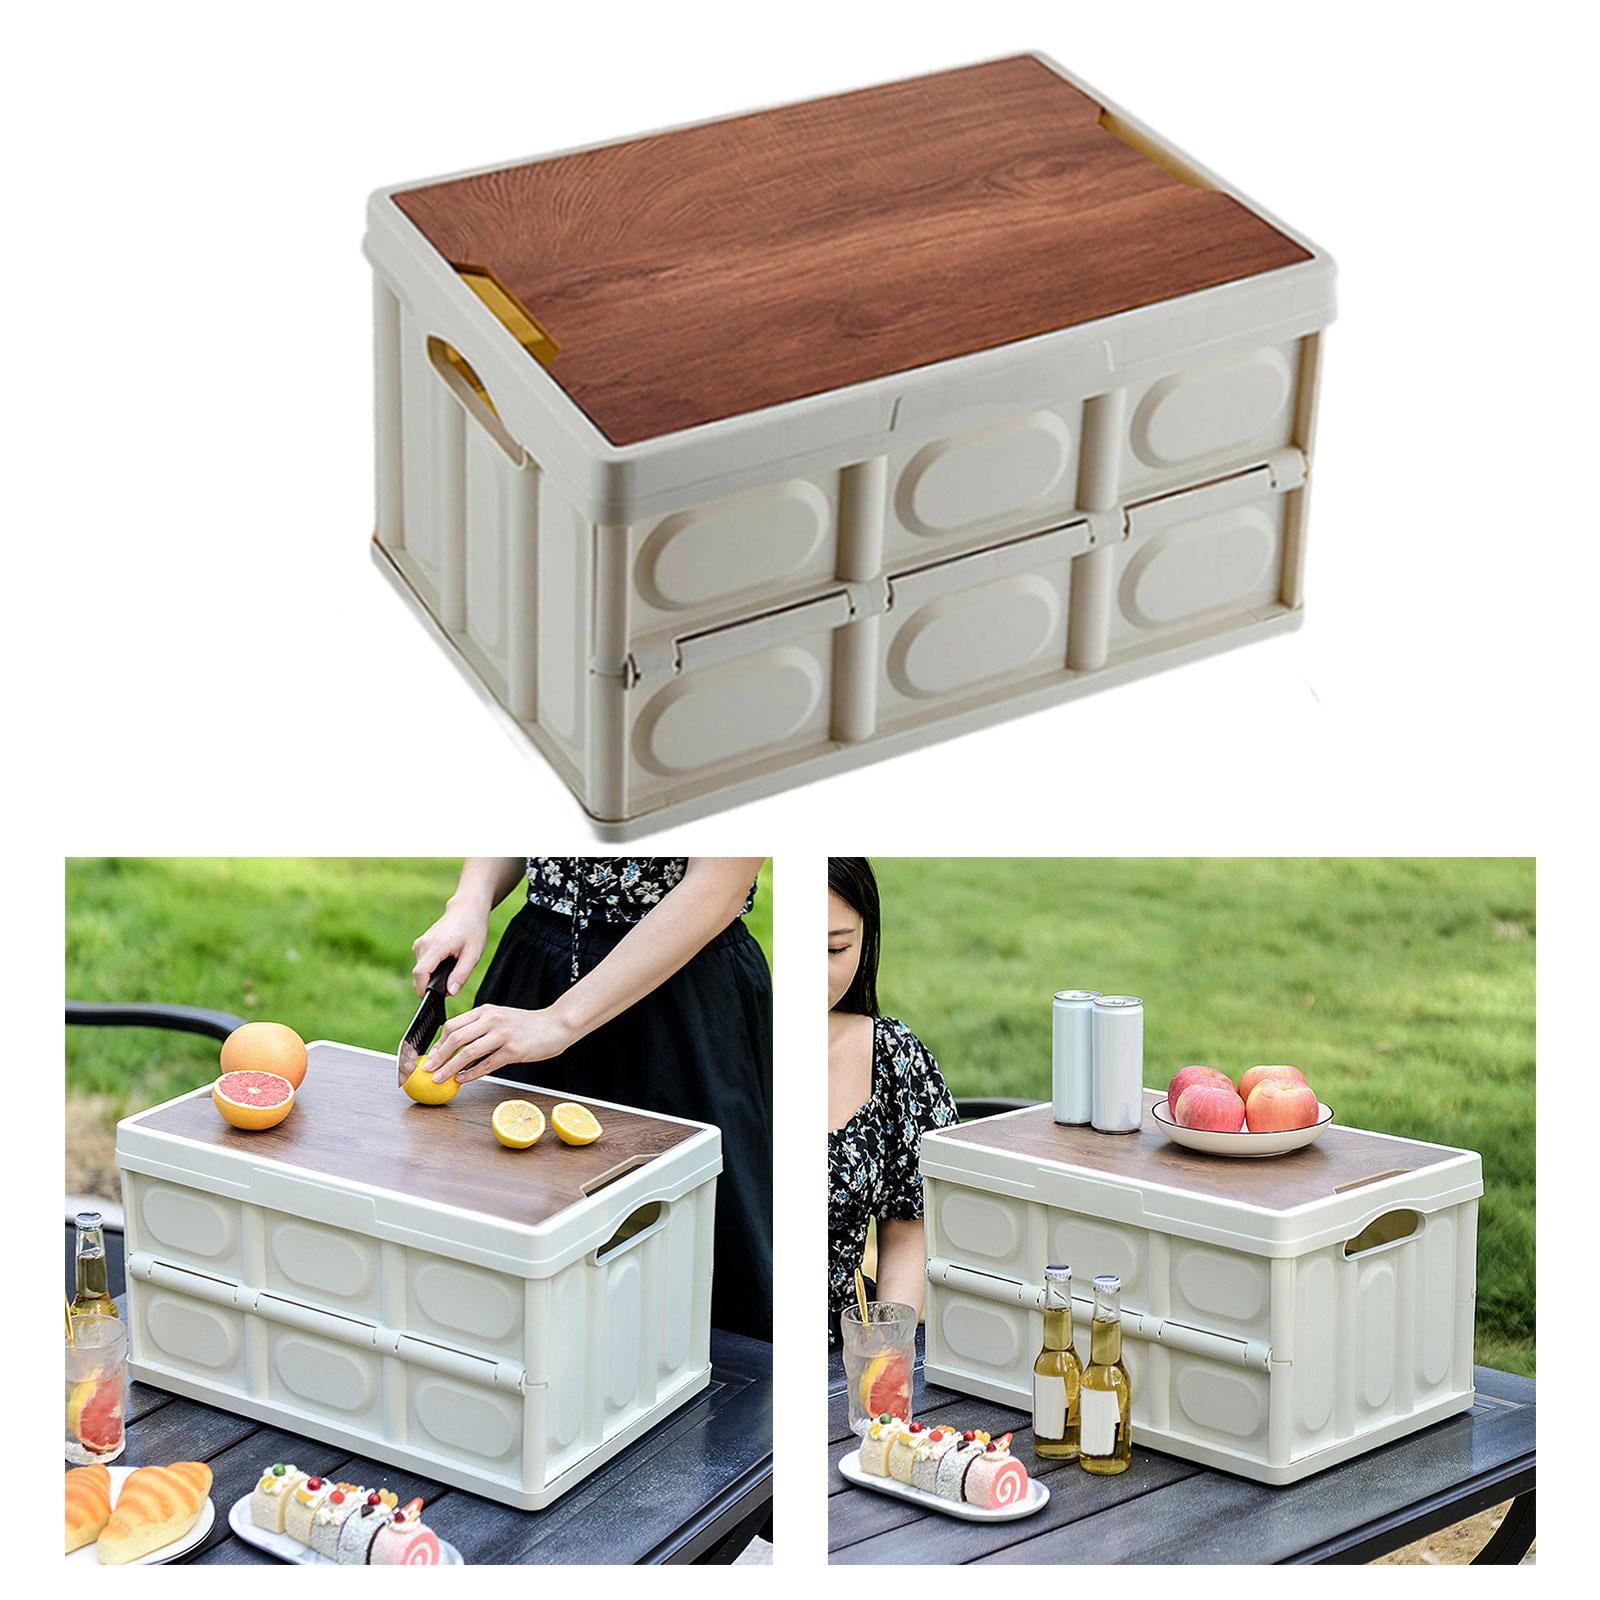 Camping Storage Box Multi Function Storage Box, Collapsible Lidded Trunk  Organizer, Collapsible Storage Bins with Wood Lids for Camping, Closet  Medium 